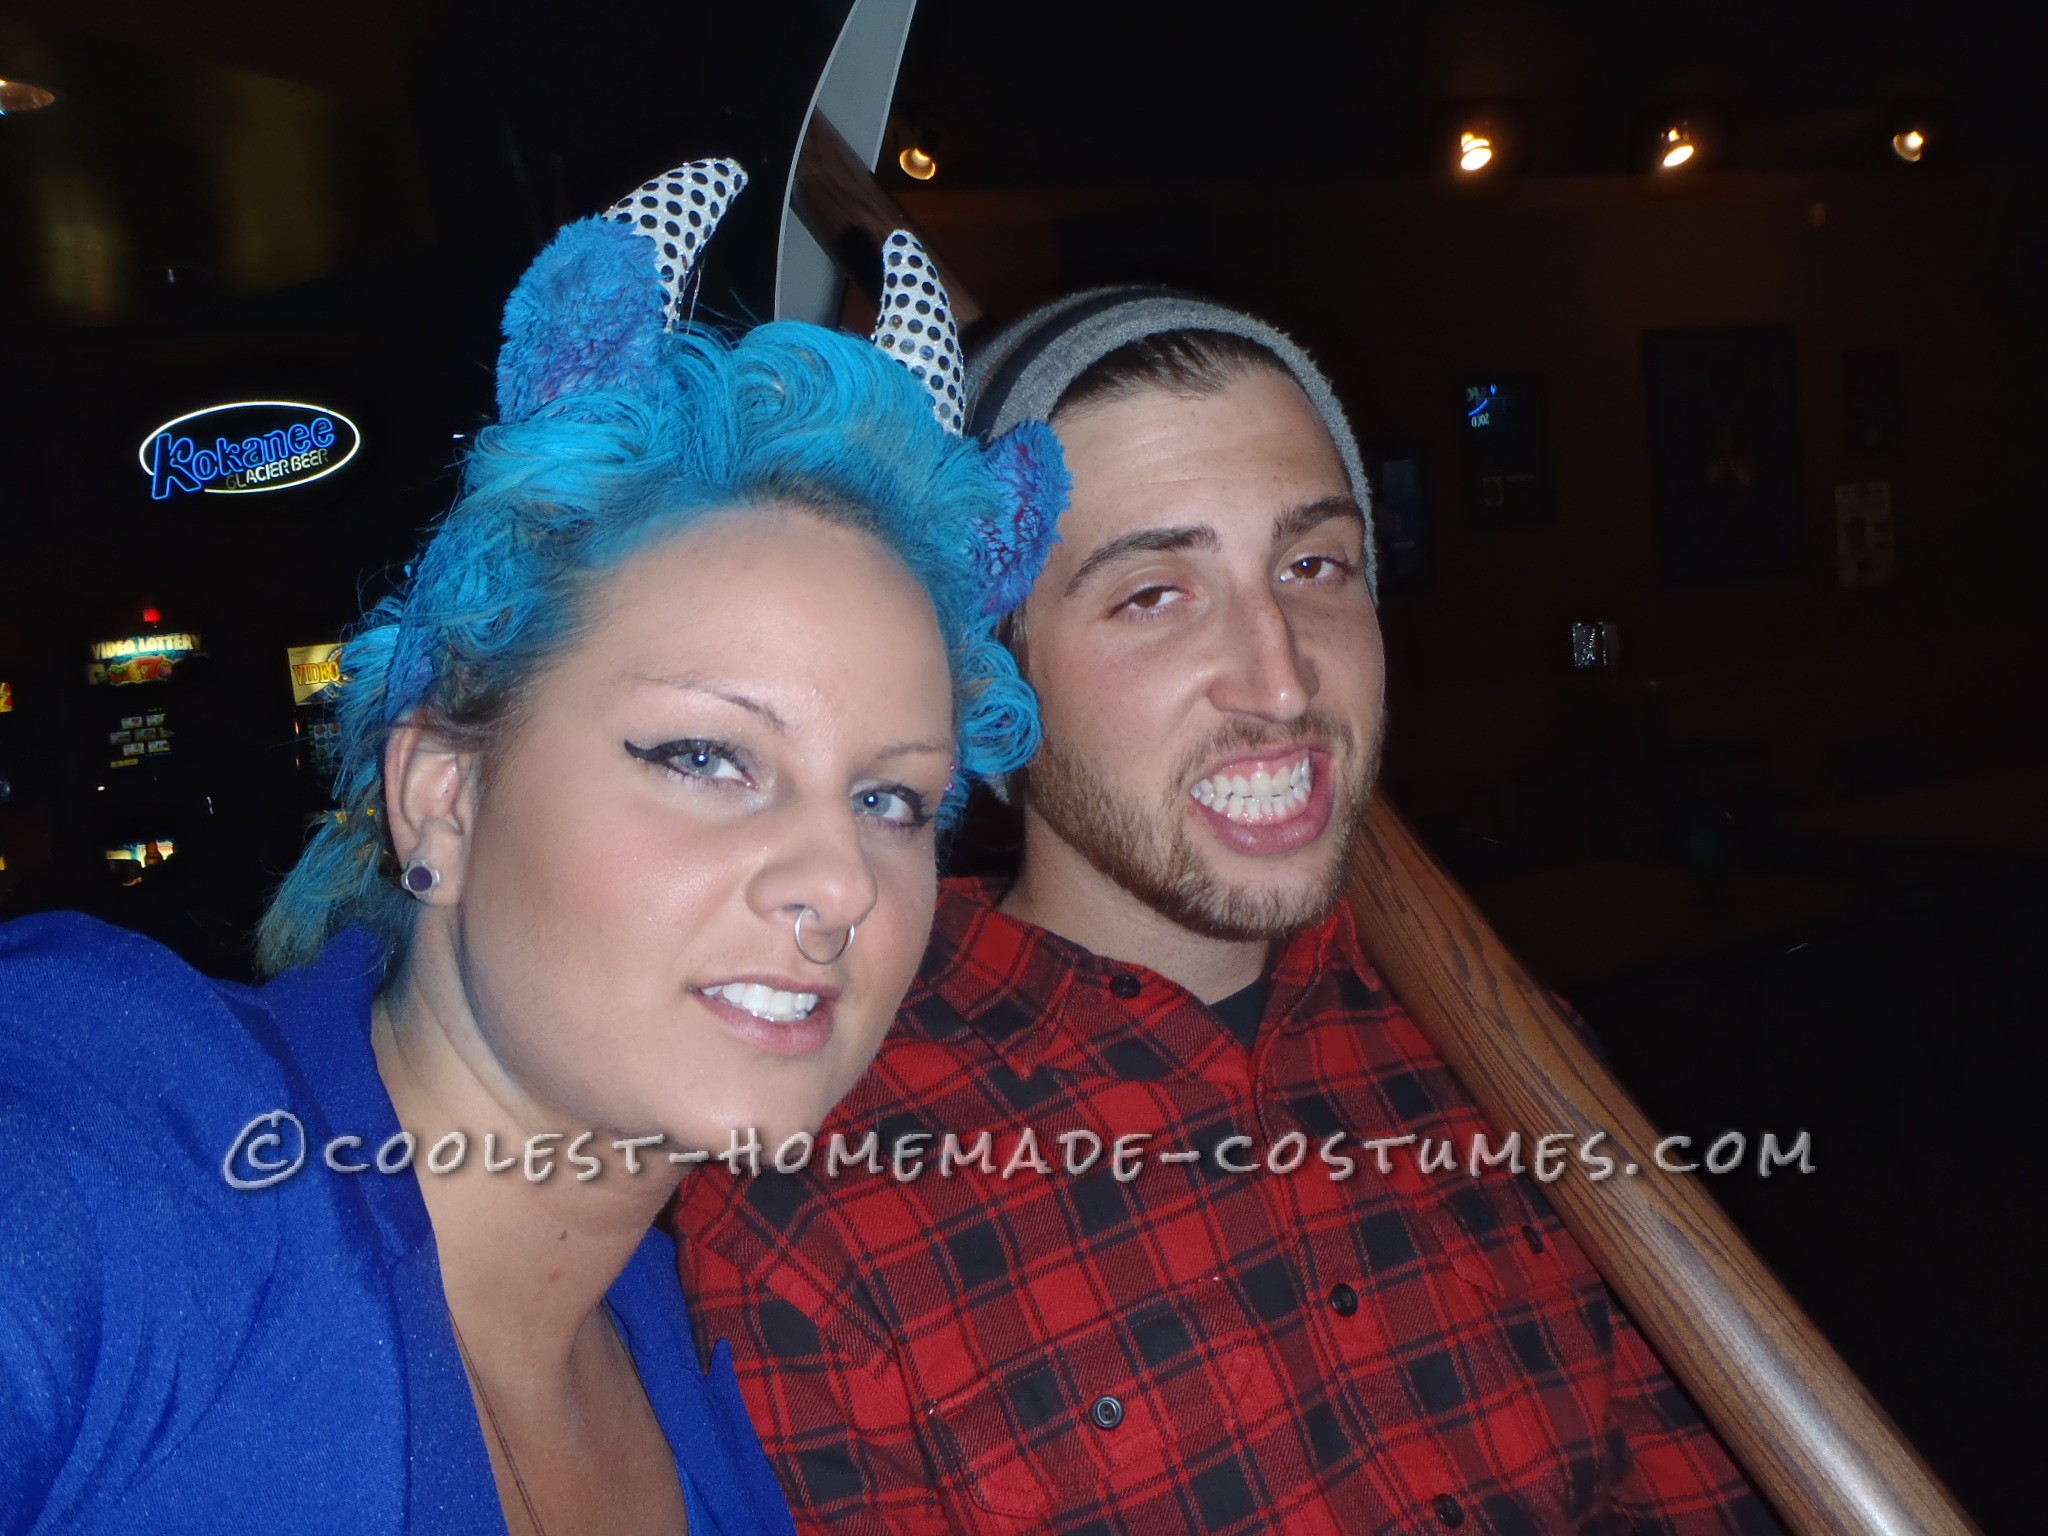 Coolest Homemade Couple Costume Idea: Paul Bunyan and Babe the Blue Ox